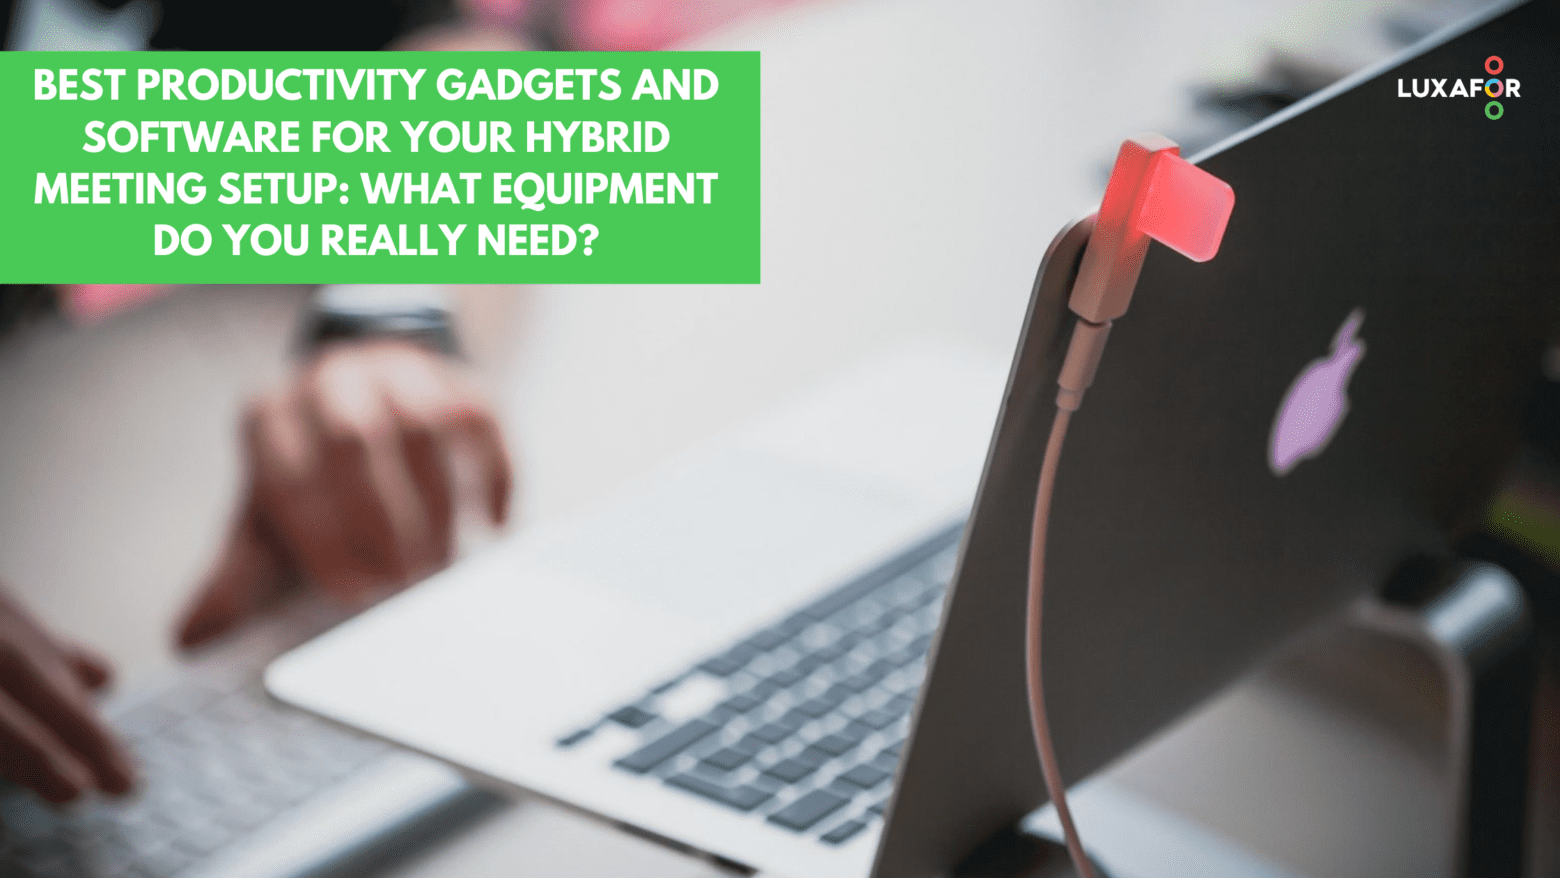 Desk gadgets and accessories for ultimate productivity, by Gadget Flow, Gadget Flow